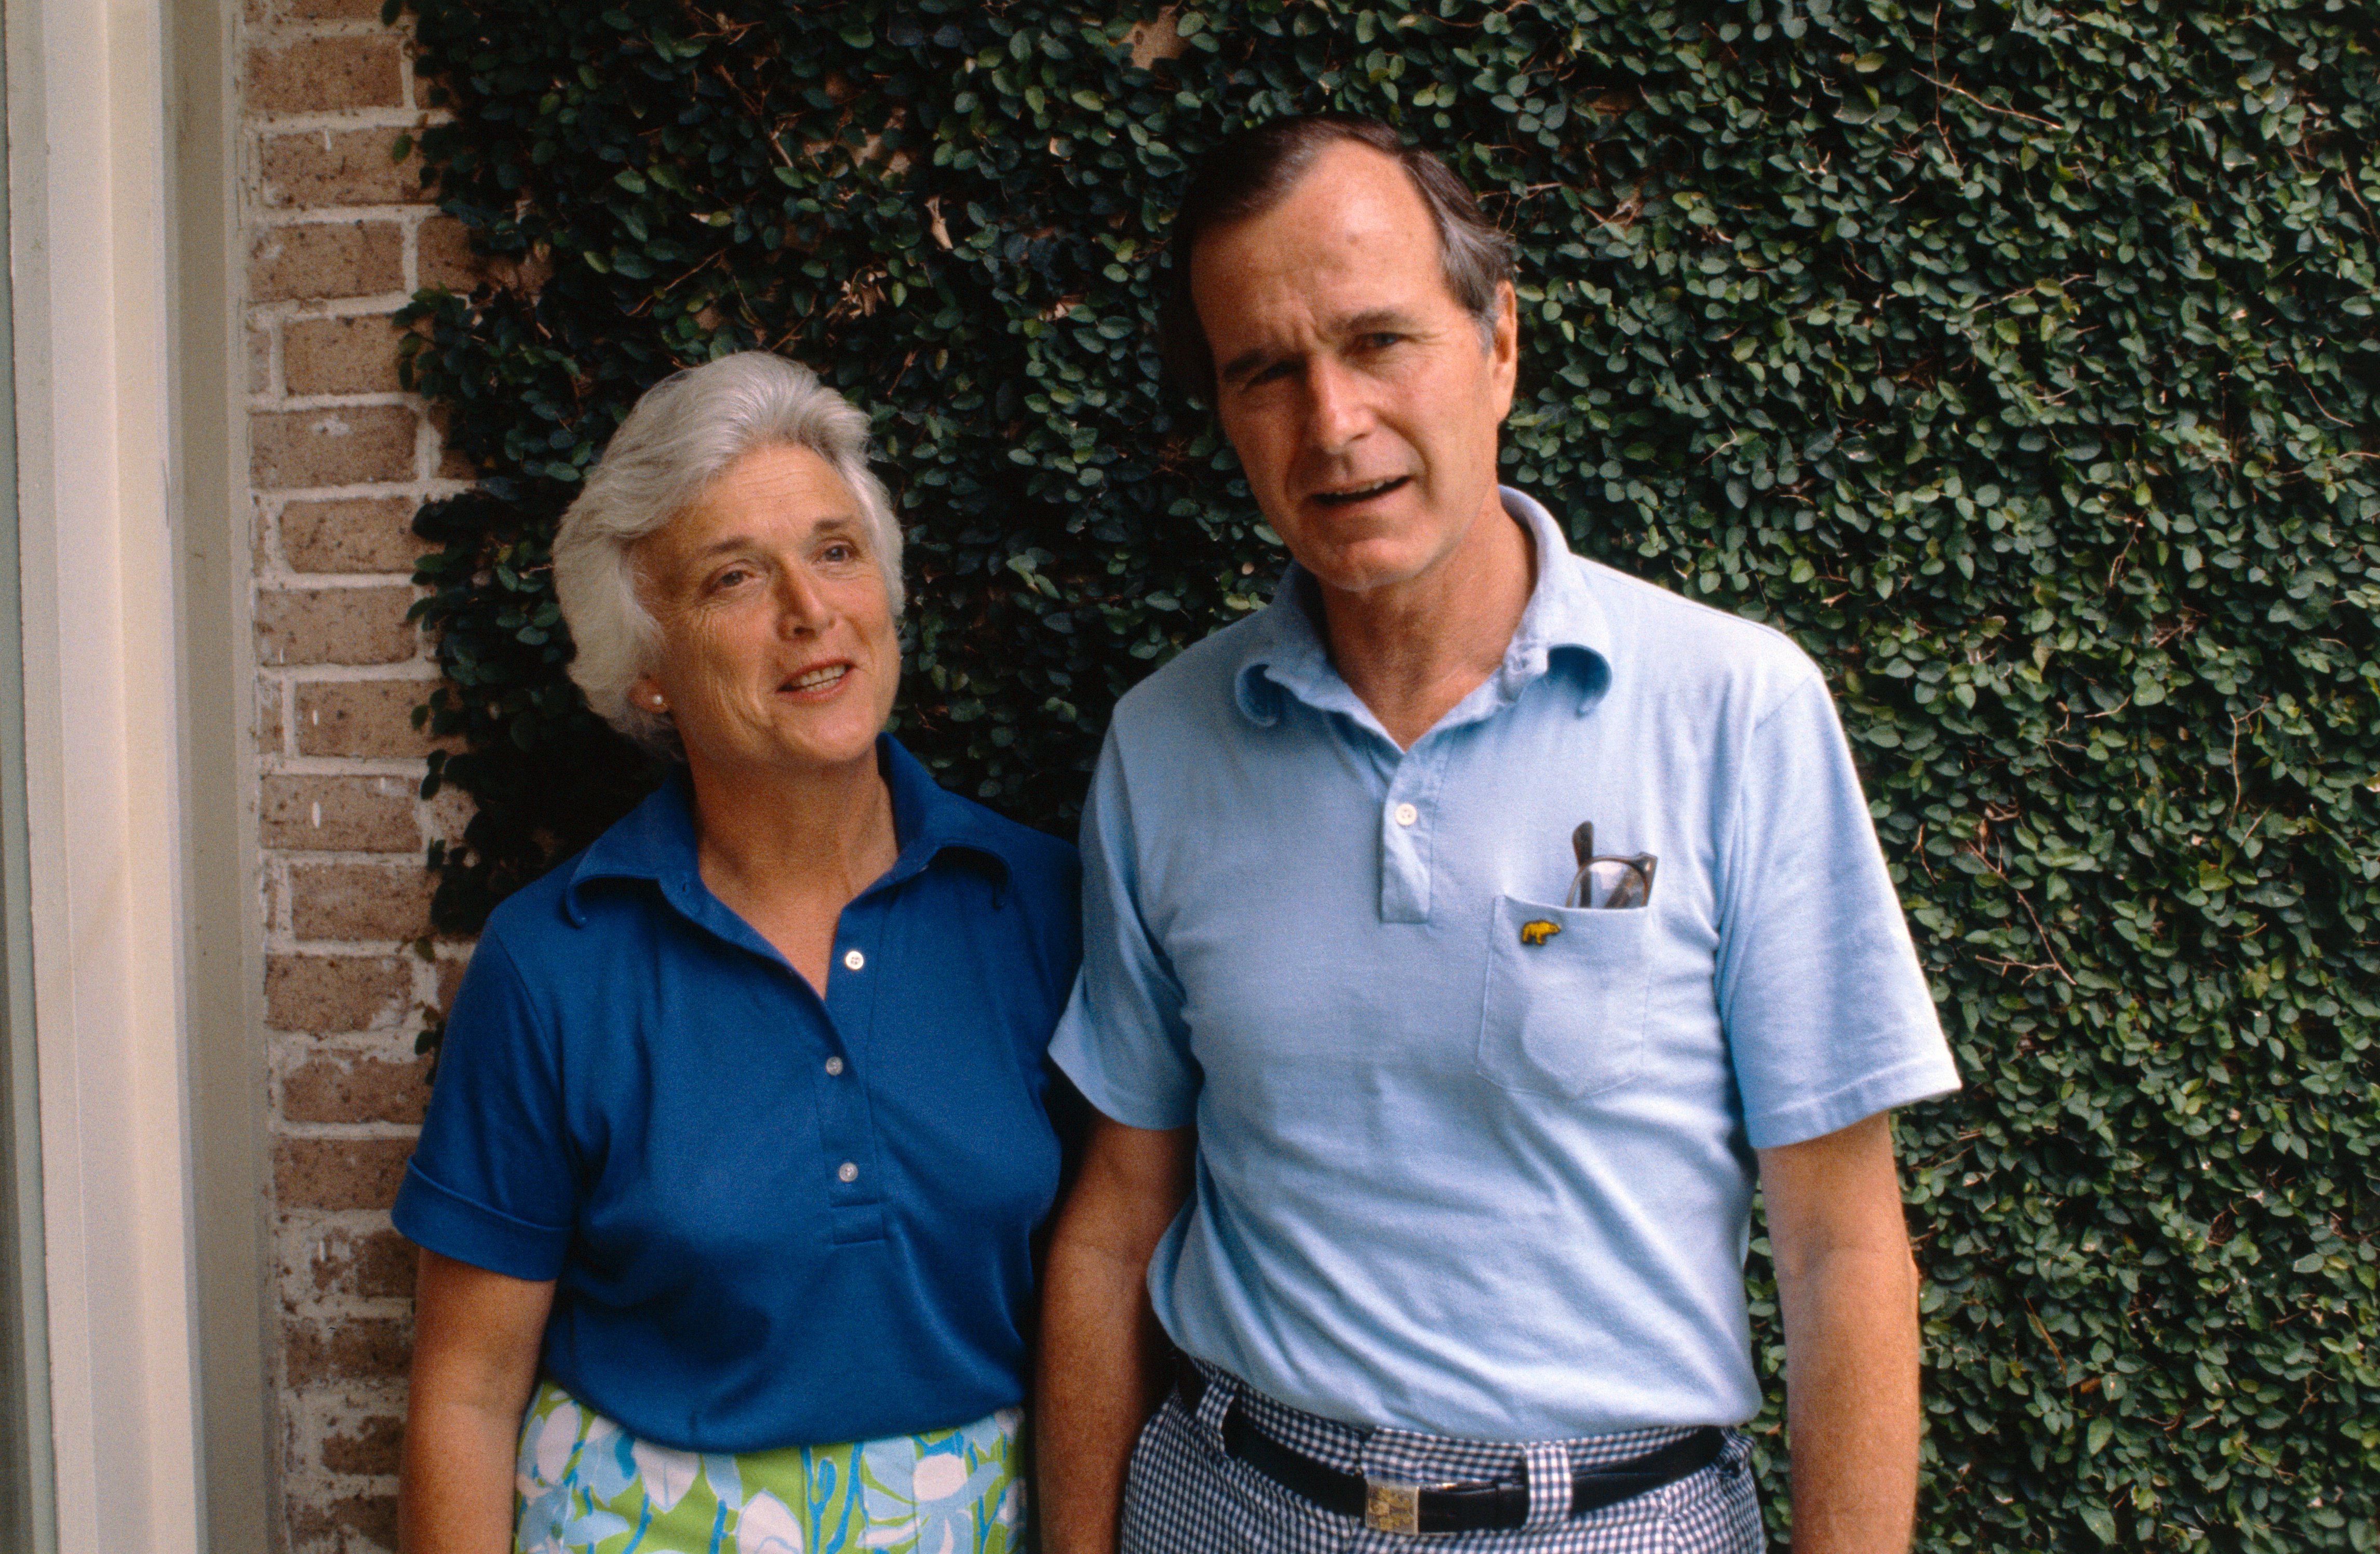 George Bush and his Wife, Barbara Bush, pictured at their house | Source: Getty Images